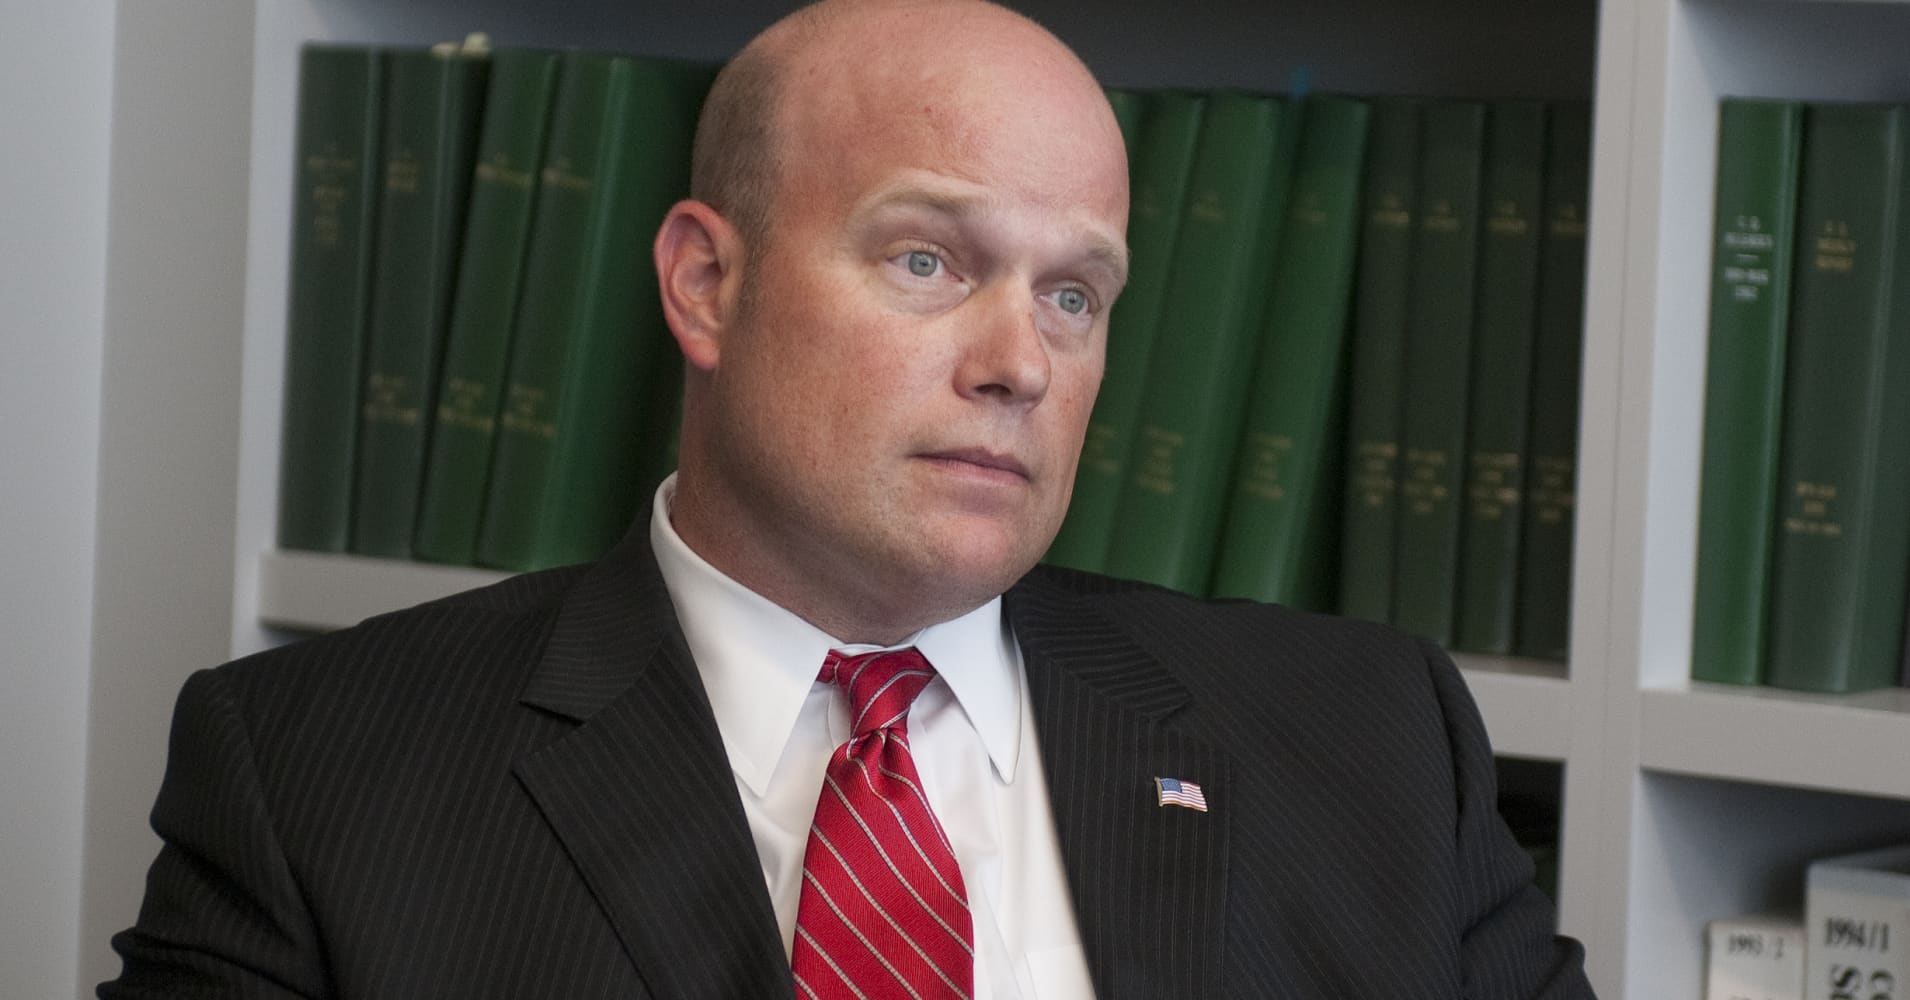 FBI reportedly investigating company where Trump's acting attorney general was advisory-board member